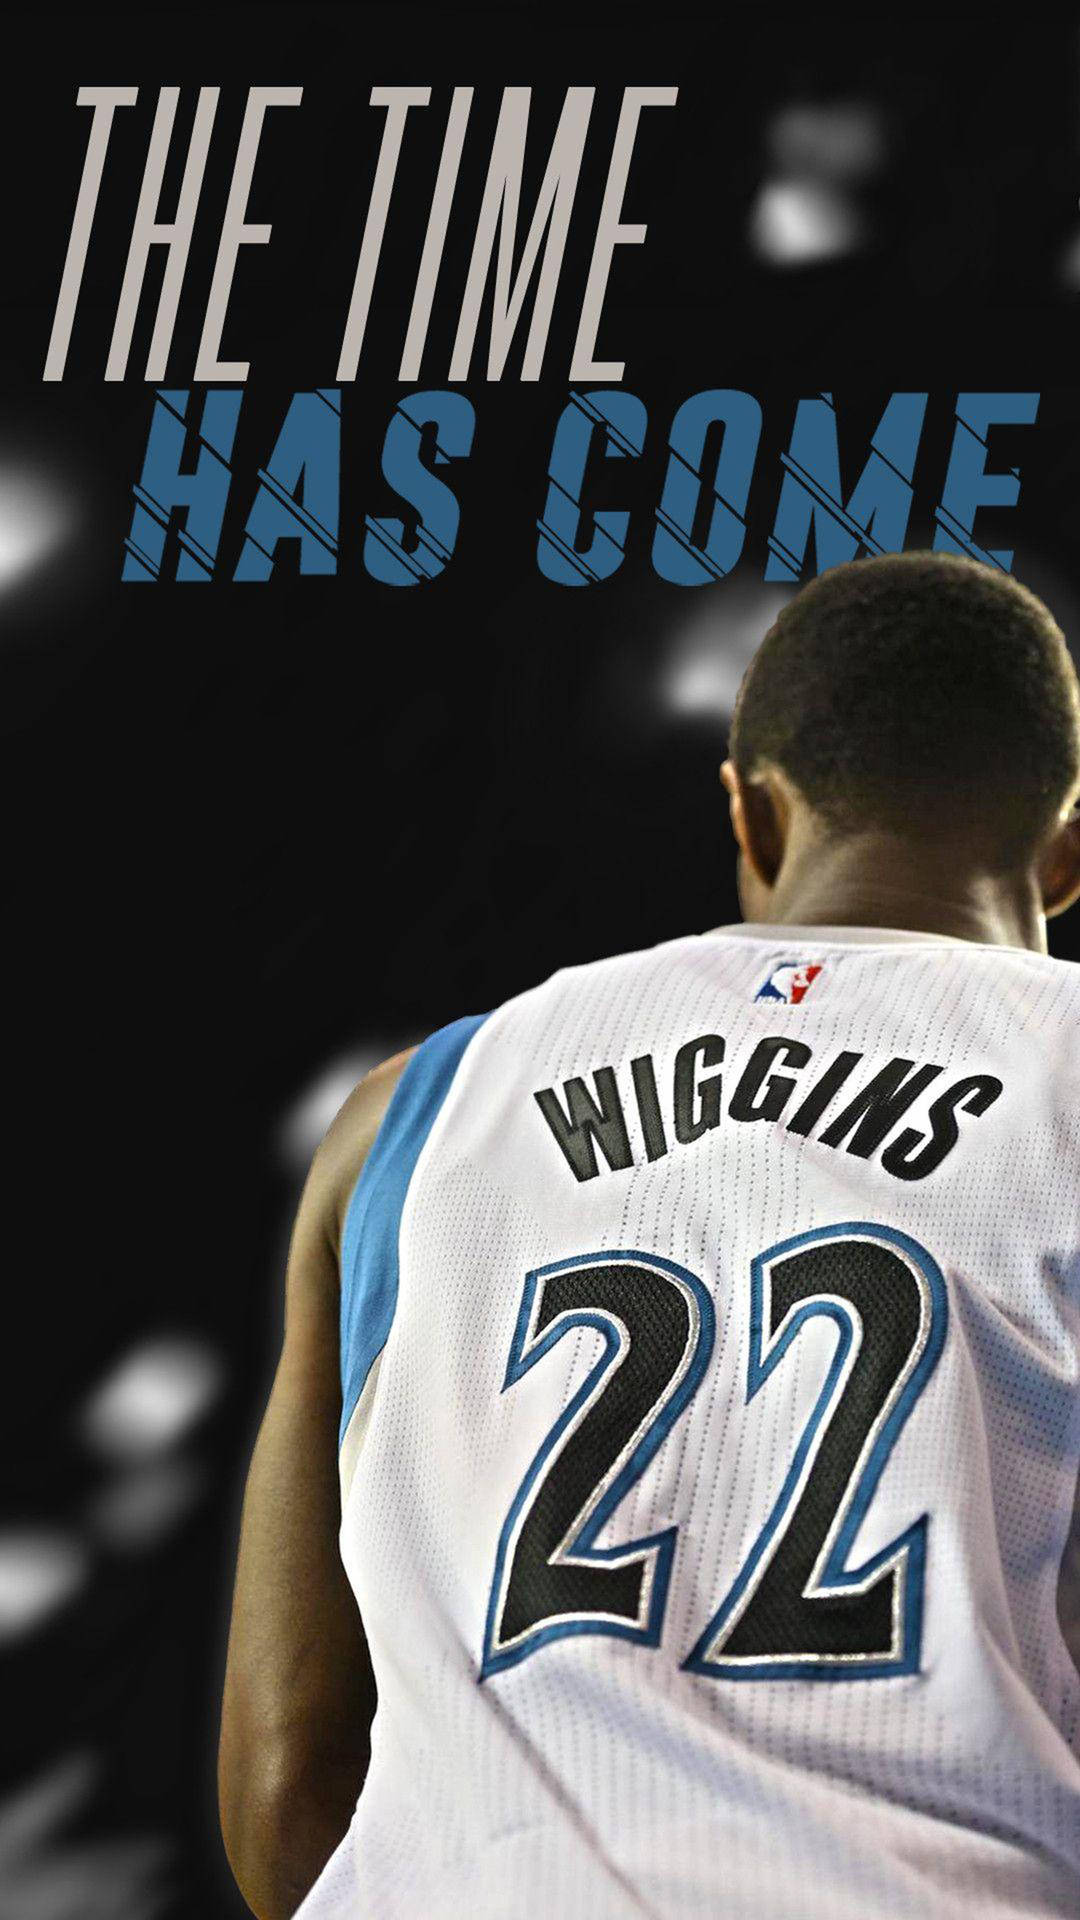 Andrew Wiggins Jersey Poster Background